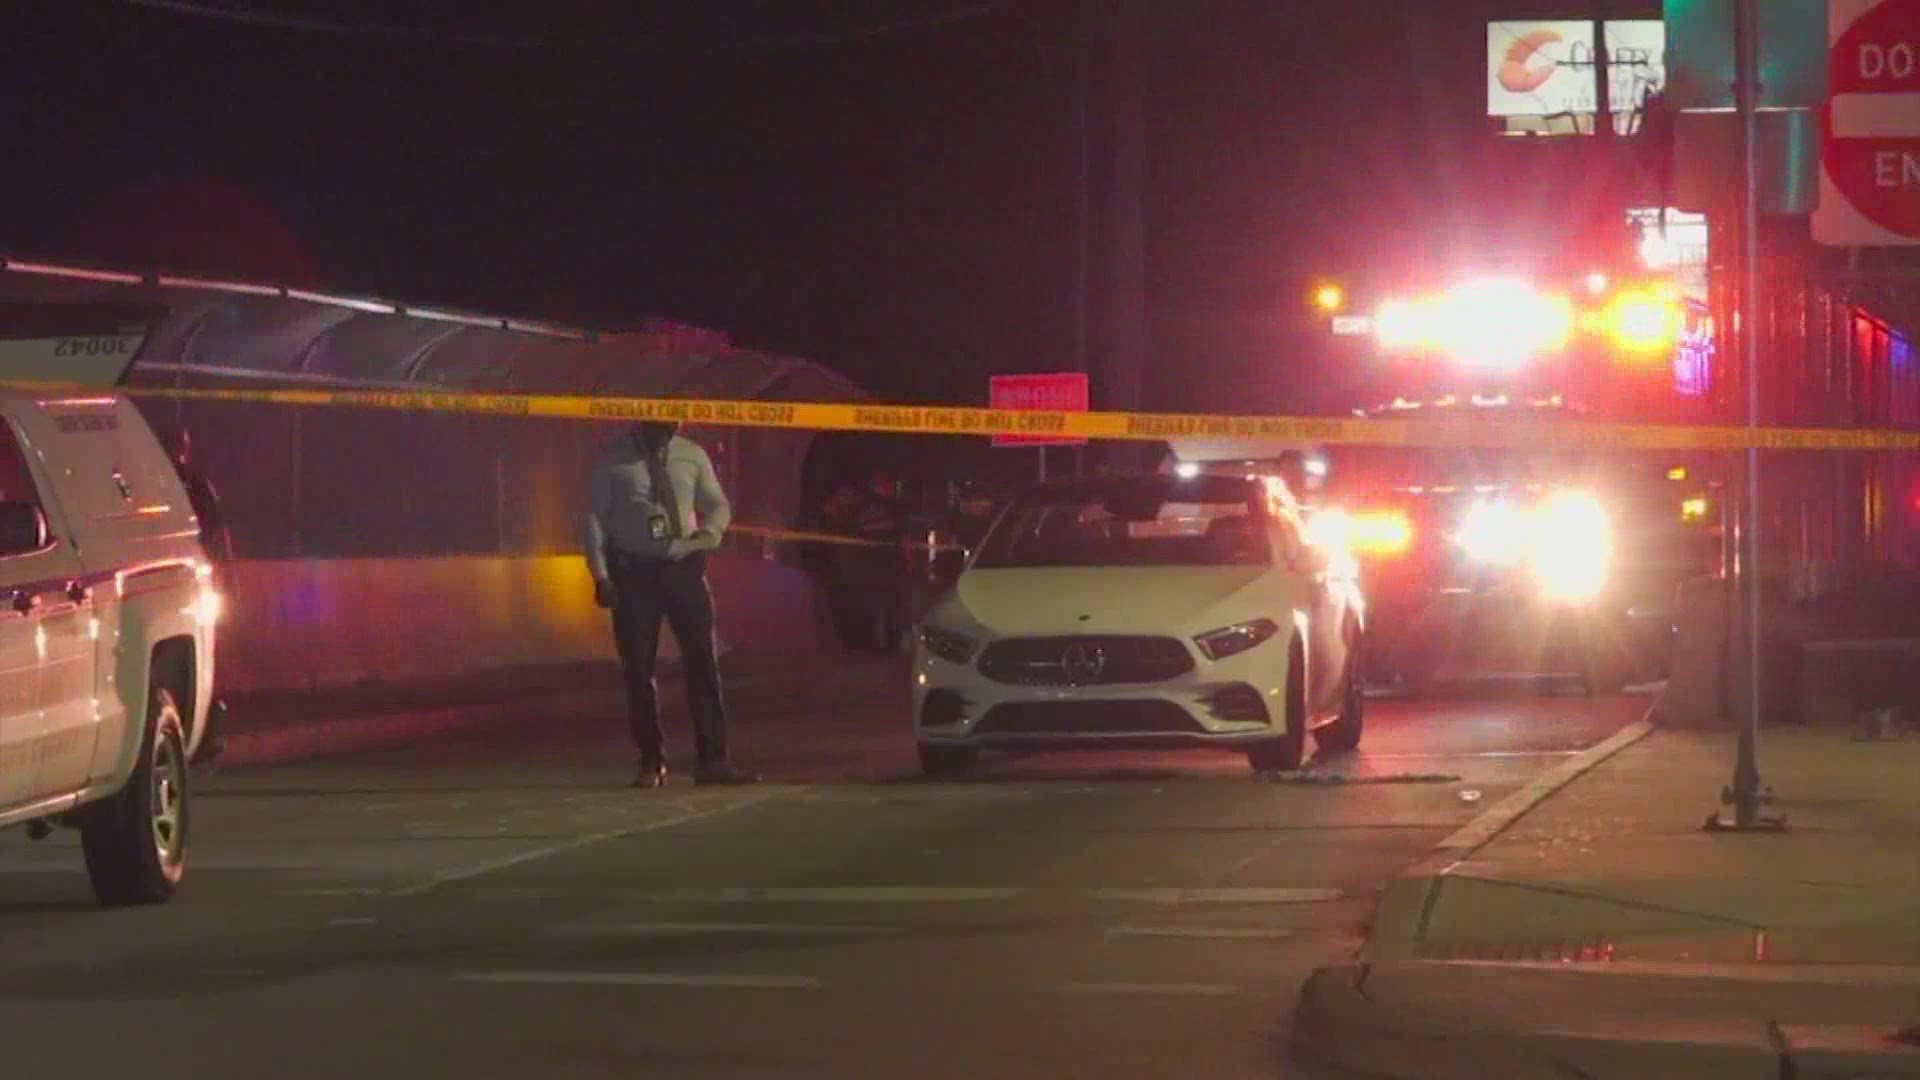 Harris County Sheriff’s deputies are looking for a driver who they said shot and killed a man in an apparent road rage while two young children were watching.